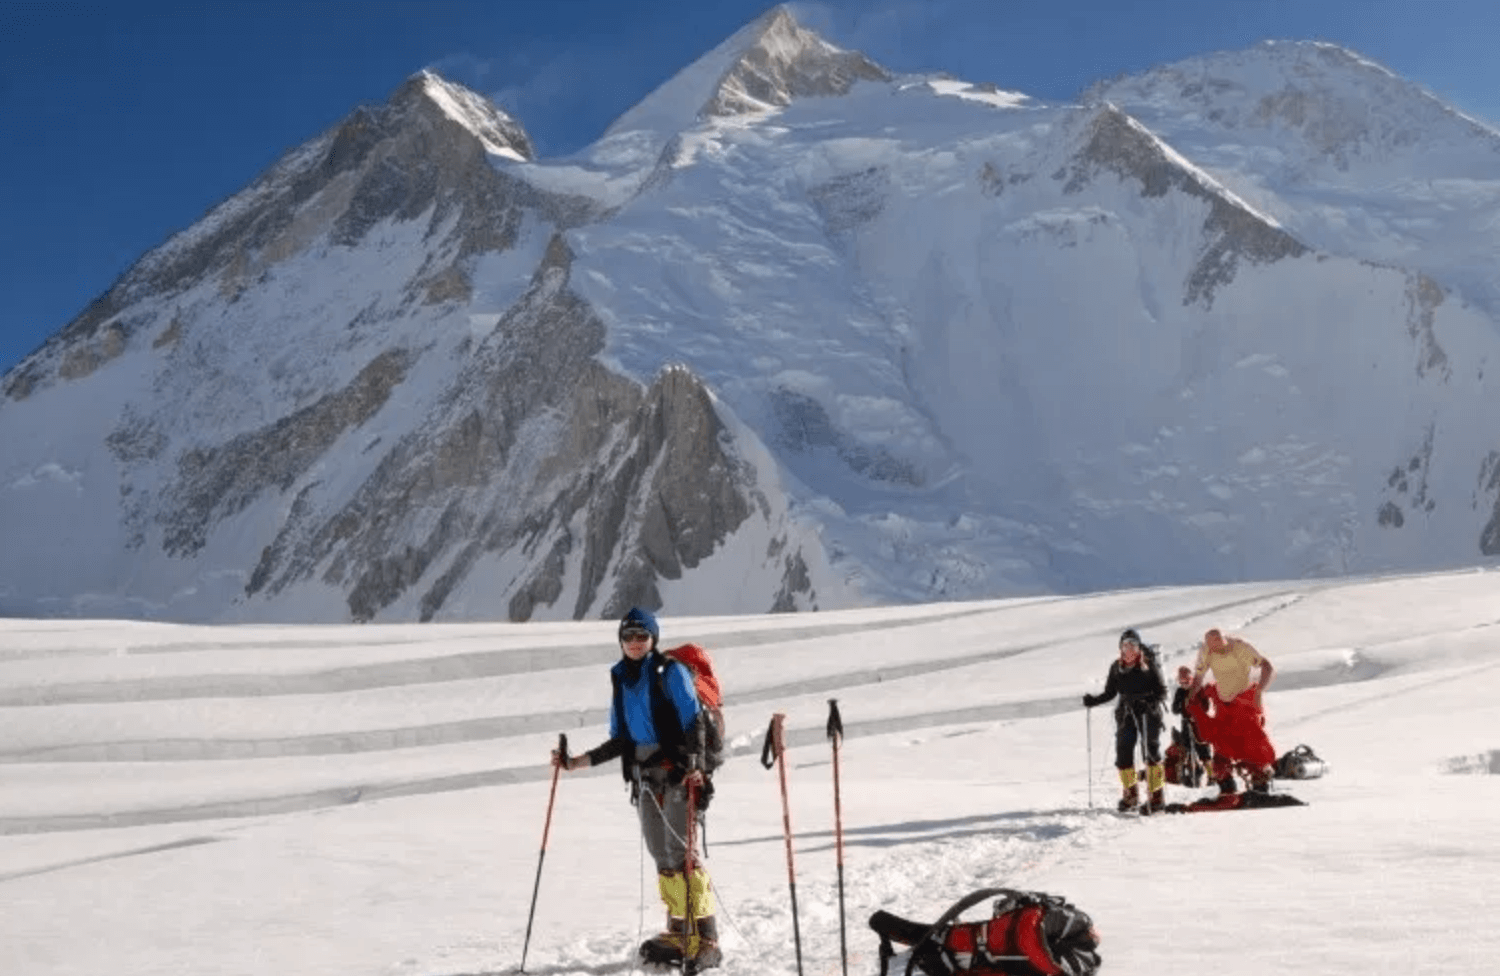 Gasherbrum I Expedition- Local tour agencyJoin K2 Travel Hub on a heart-pounding expedition to the zenith of K2. With our seasoned guides, you'll navigate the treacherous paths and surmount the formidable challenges that stand between you and the roof of the world. As you ascend, each step is a stride into the extraordinary, a dance with destiny at the edge of the sky. This is your call to greatness, to rise above the mundane and claim your place among the stars. Book now and transform your aspirations into reality. The legend awaits—will you answer the call?Gasherbrum I Expedition